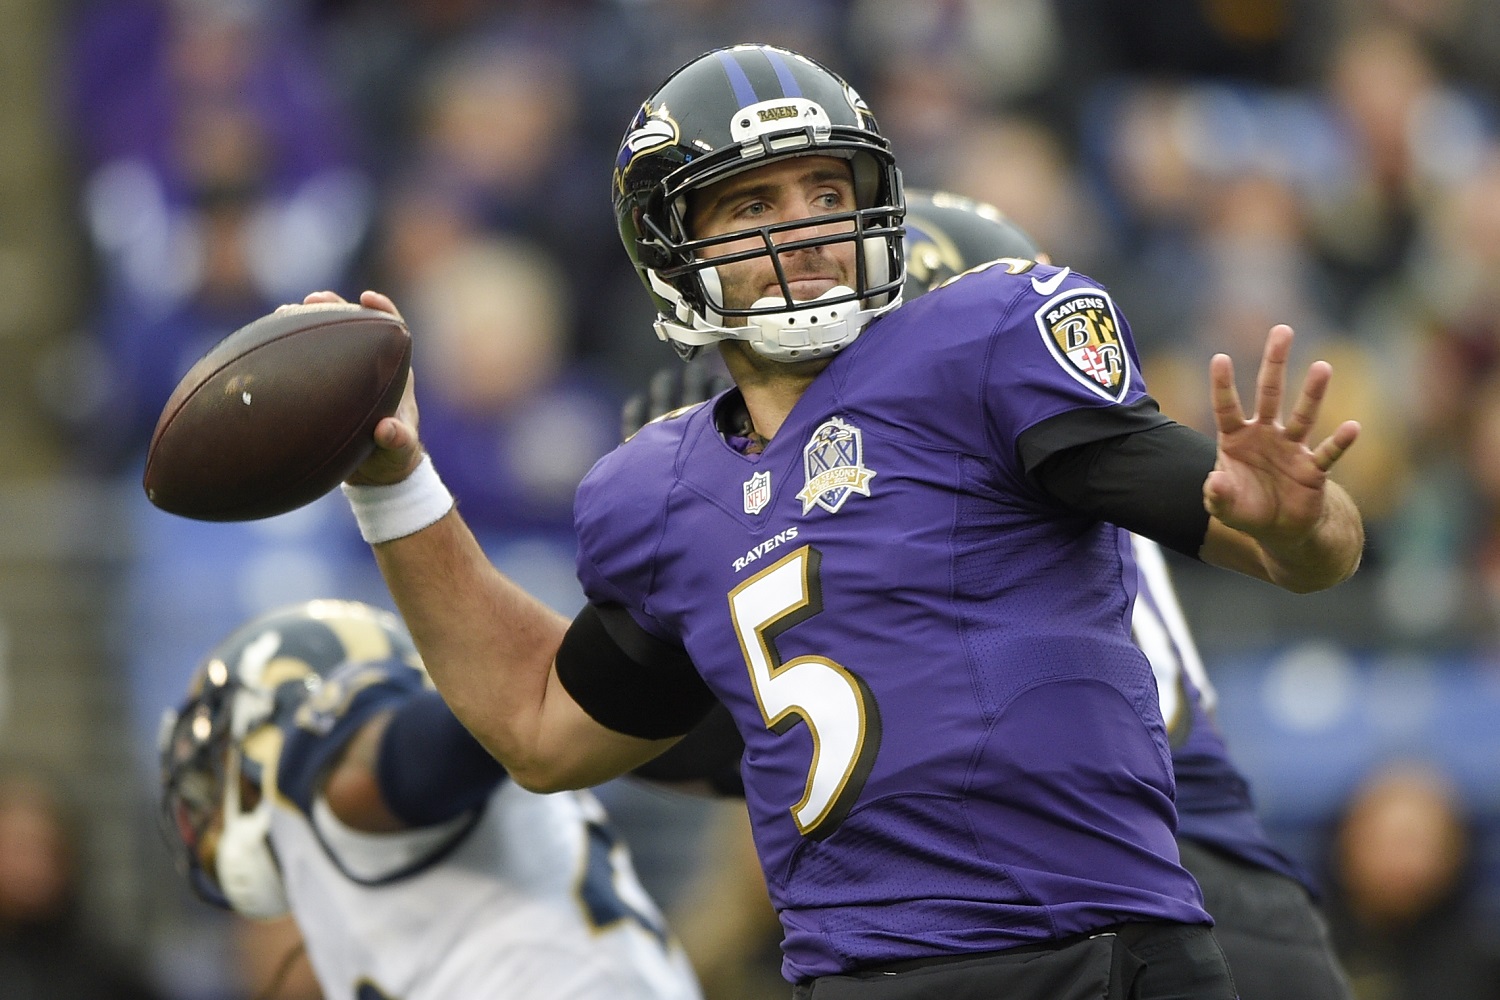 FILE - In this Nov. 22, 2015, file photo, Baltimore Ravens quarterback Joe Flacco passes the ball during the second half of an NFL football game against the St. Louis Rams, in Baltimore. Flacco, Justin Forsett and Terrell Suggs are among several members of the Ravens eager to return to the field after spending the latter stages of the 2015 season sidelined by injuries. (AP Photo/Nick Wass, File)